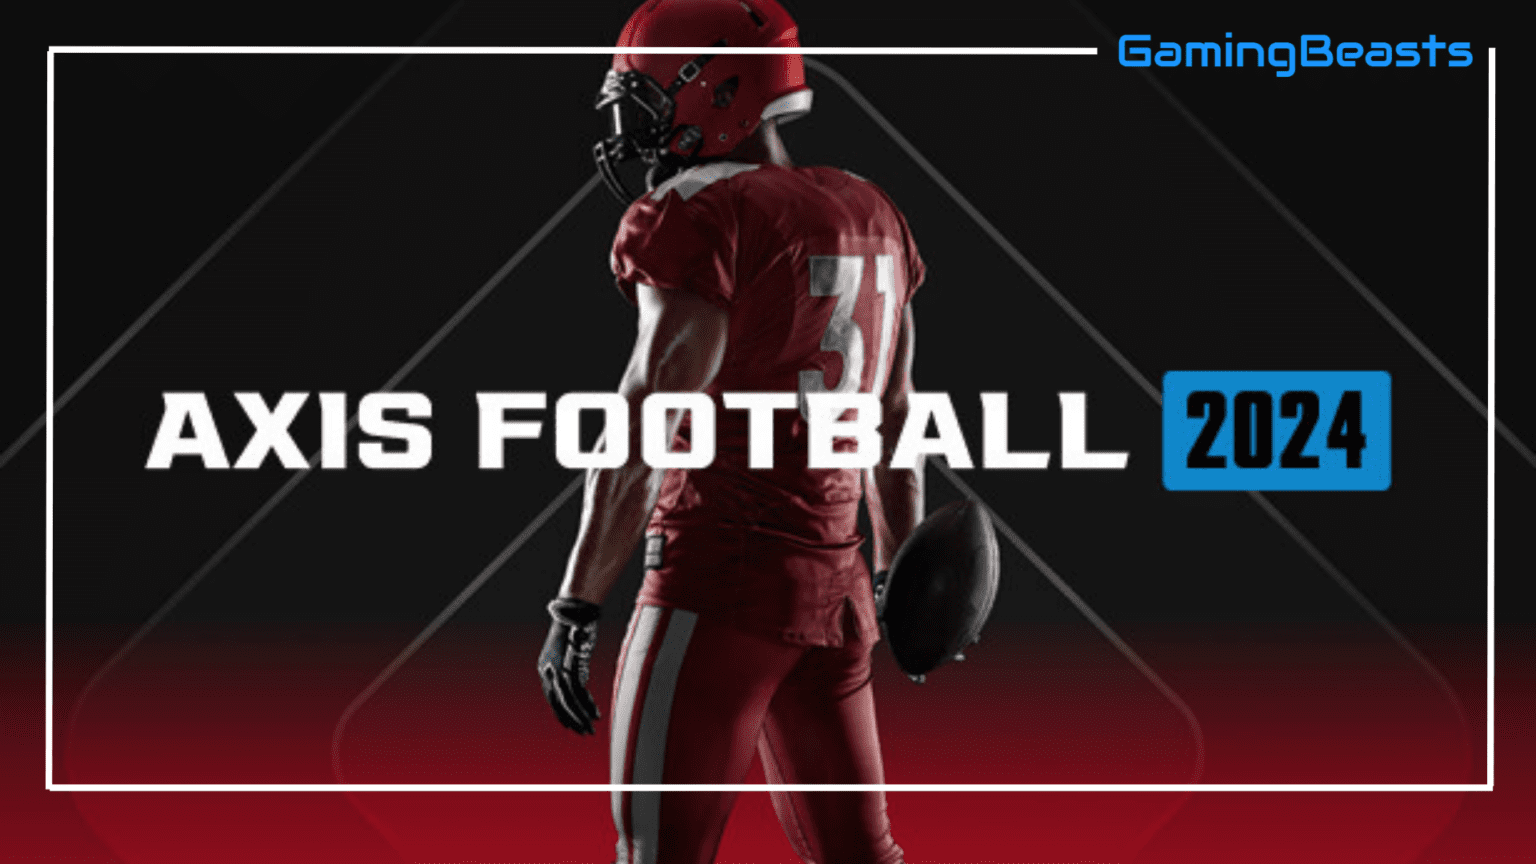 Axis Football 2024 Download Free PC Game Full Version Gaming Beasts